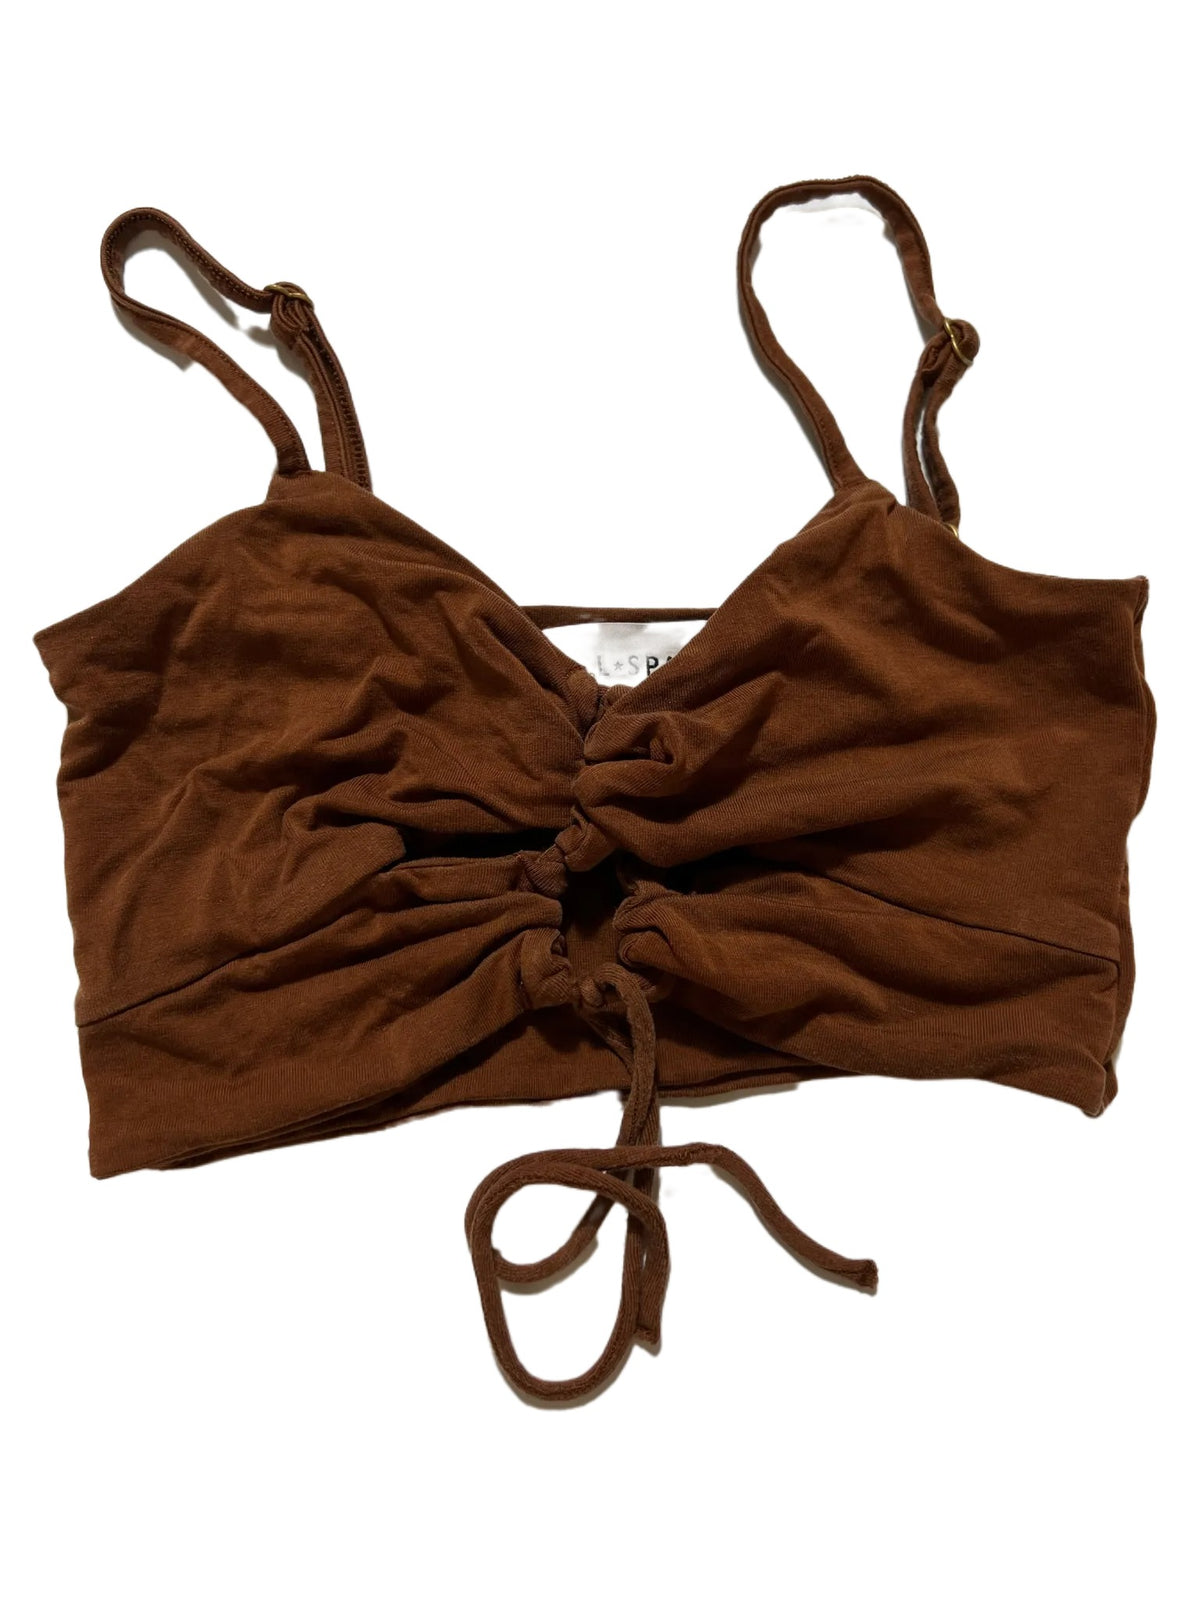 L Space- Brown "It's A Date" Top